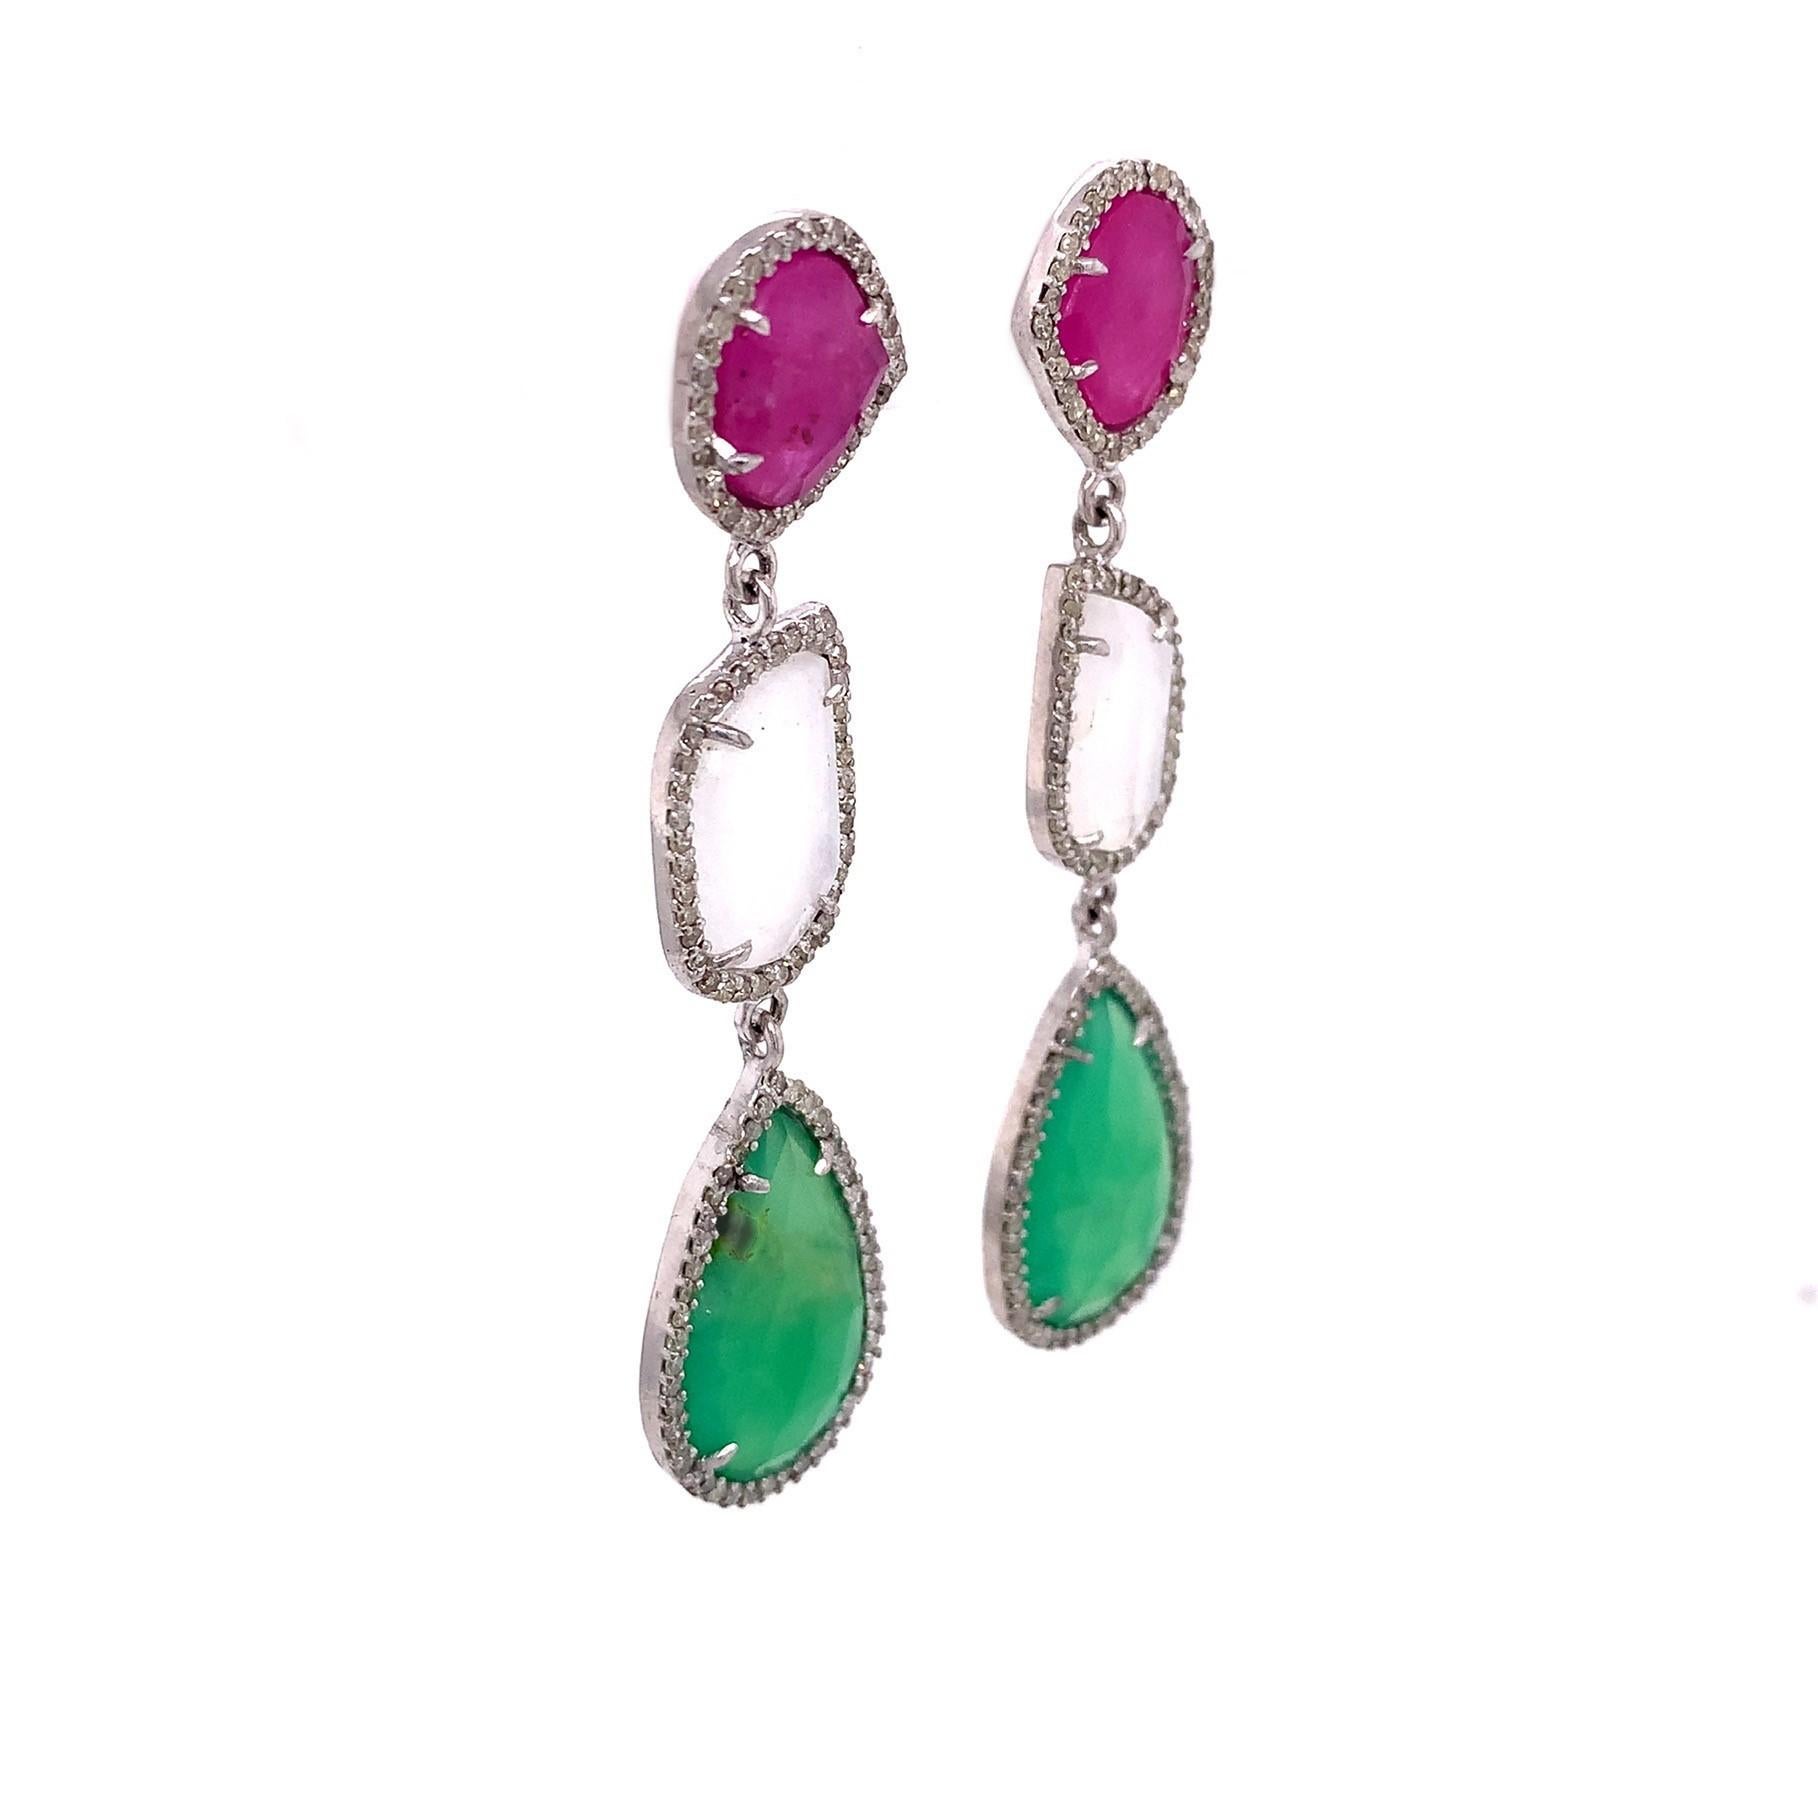 Life in color Collection

Color combination of Ruby, Moonstone and Emerald with diamonds all set in Sterling Silver.

Ruby: 5.00ct total weight.
Moonstone: 4.92ct total weight.
Emerald:10.20ct total weight.